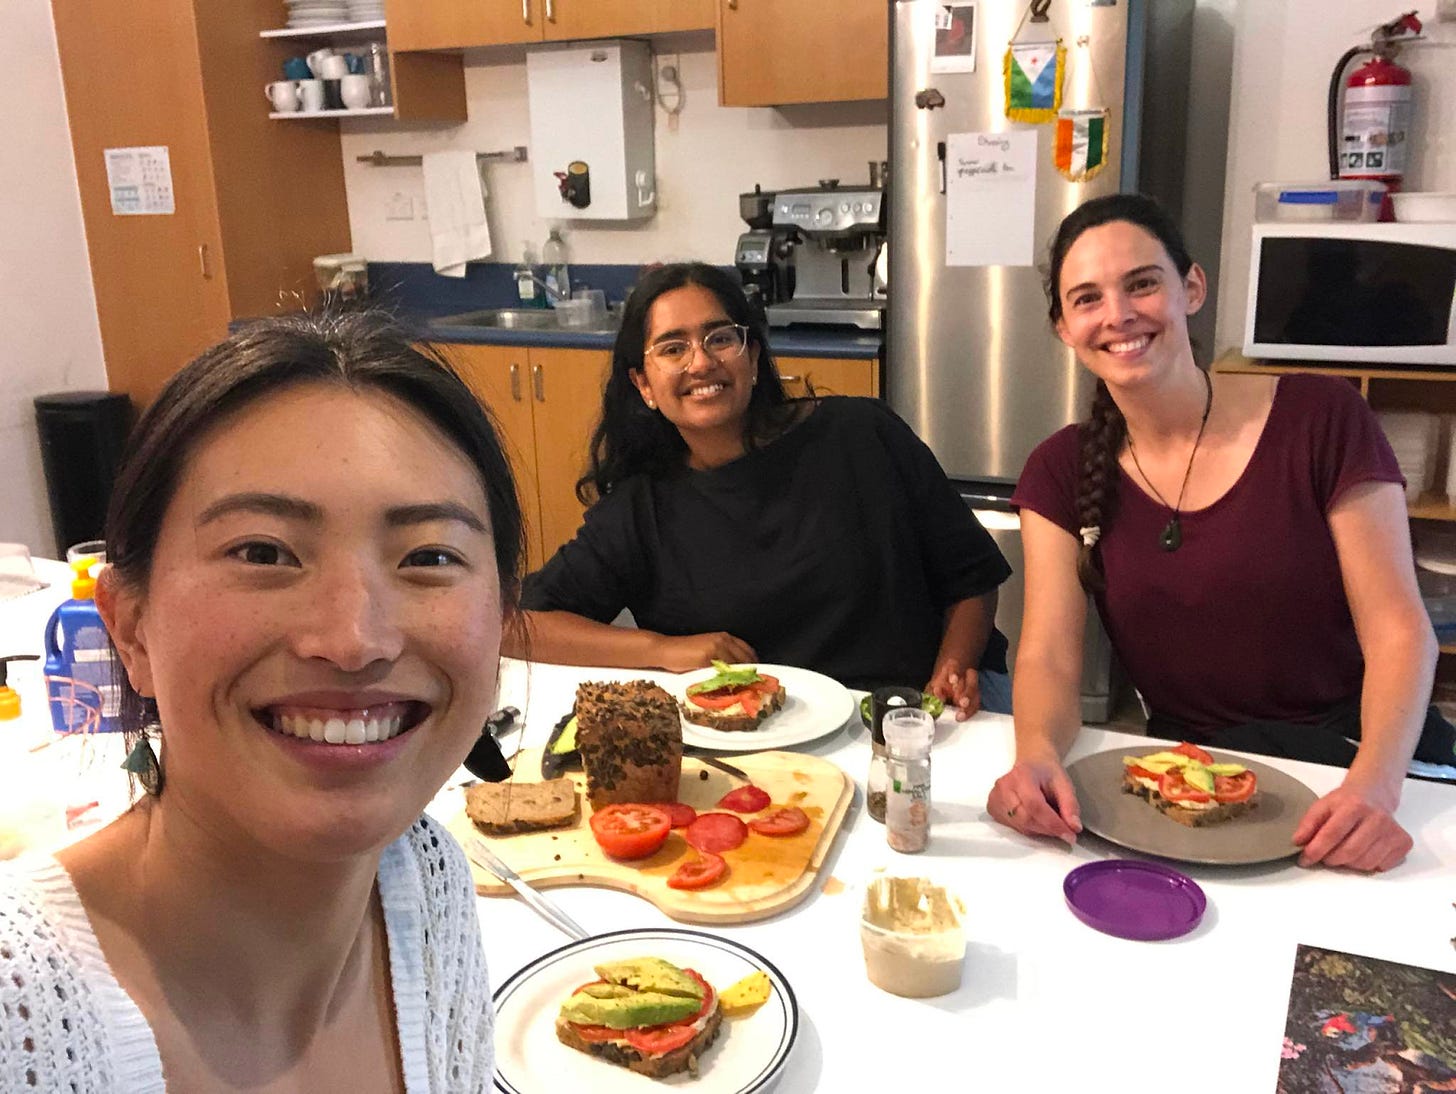 A selfie with Jenny (Asian woman with hair in ponytail and knitted top), Dhanya (brown woman with glasses, wavy dark hair and a black airy top), and Emily (Pākeha woman with long brown braid coming over her shoulder, maroon t-shirt and pounamu necklace). They are sitting at a table with plates of bread, tomatoes, hummus, and avocado in front of them.